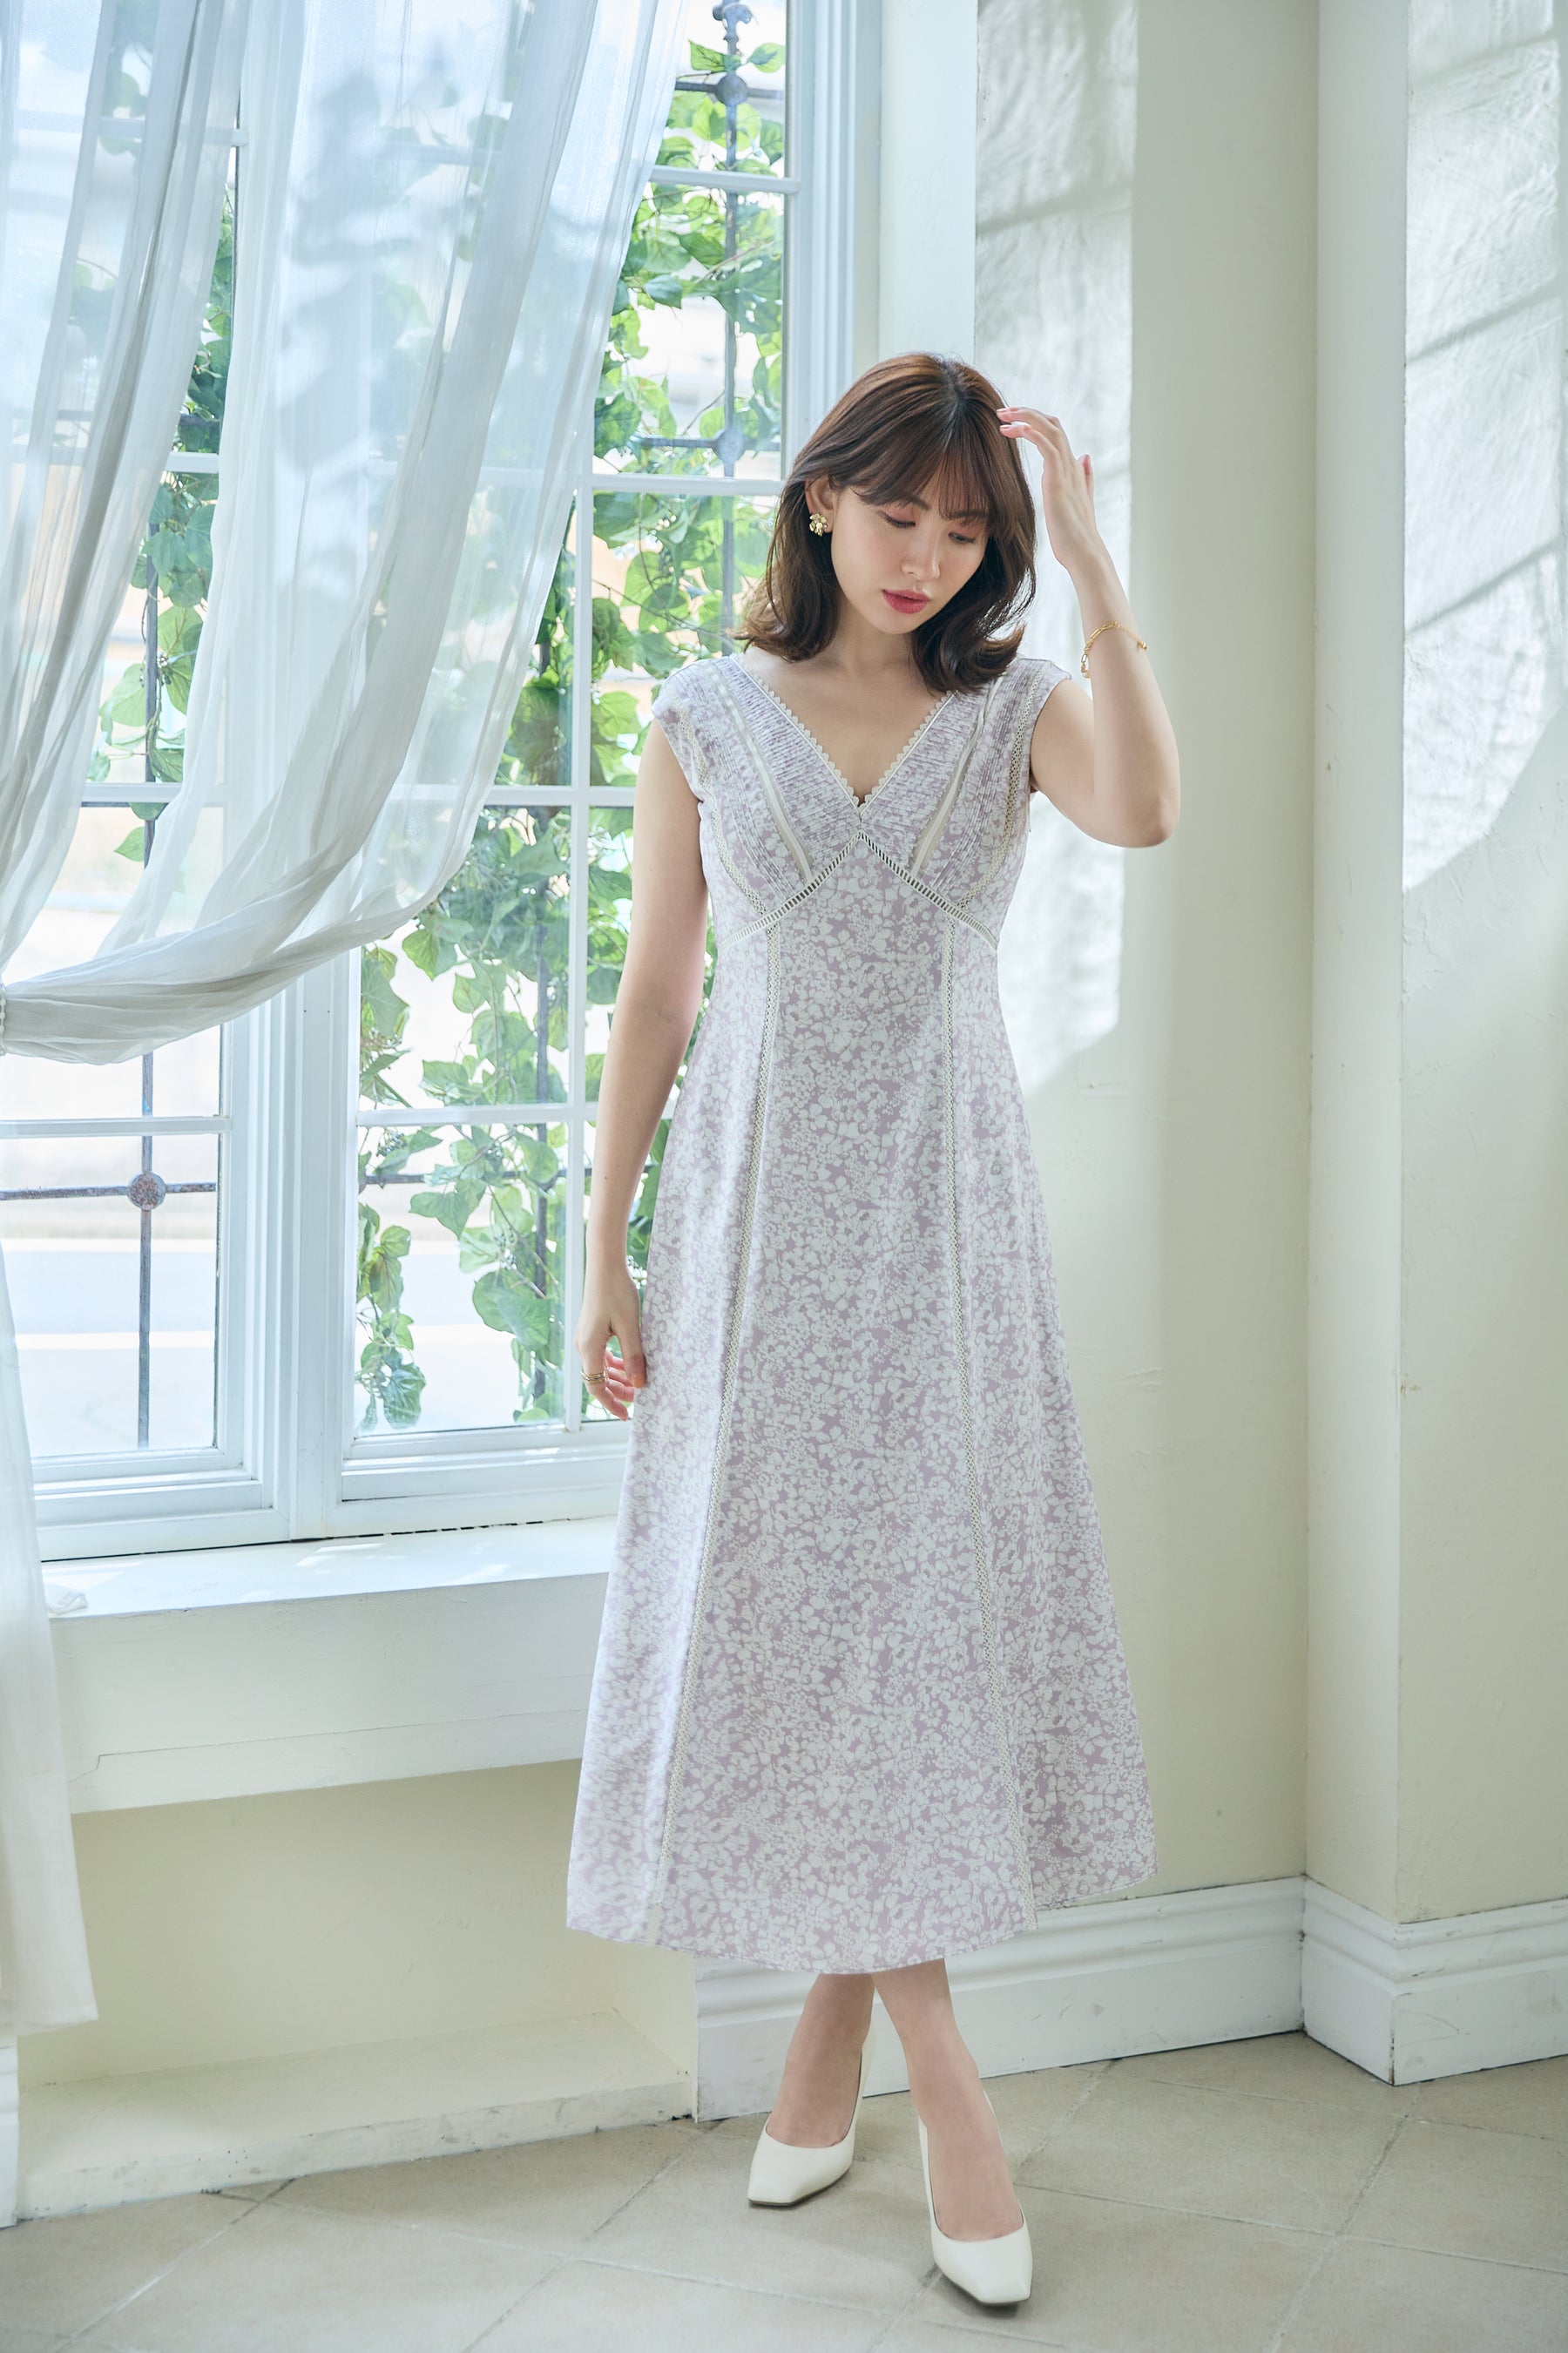 herlipto Lace Trimmed Floral Dress フローラル - ロングワンピース